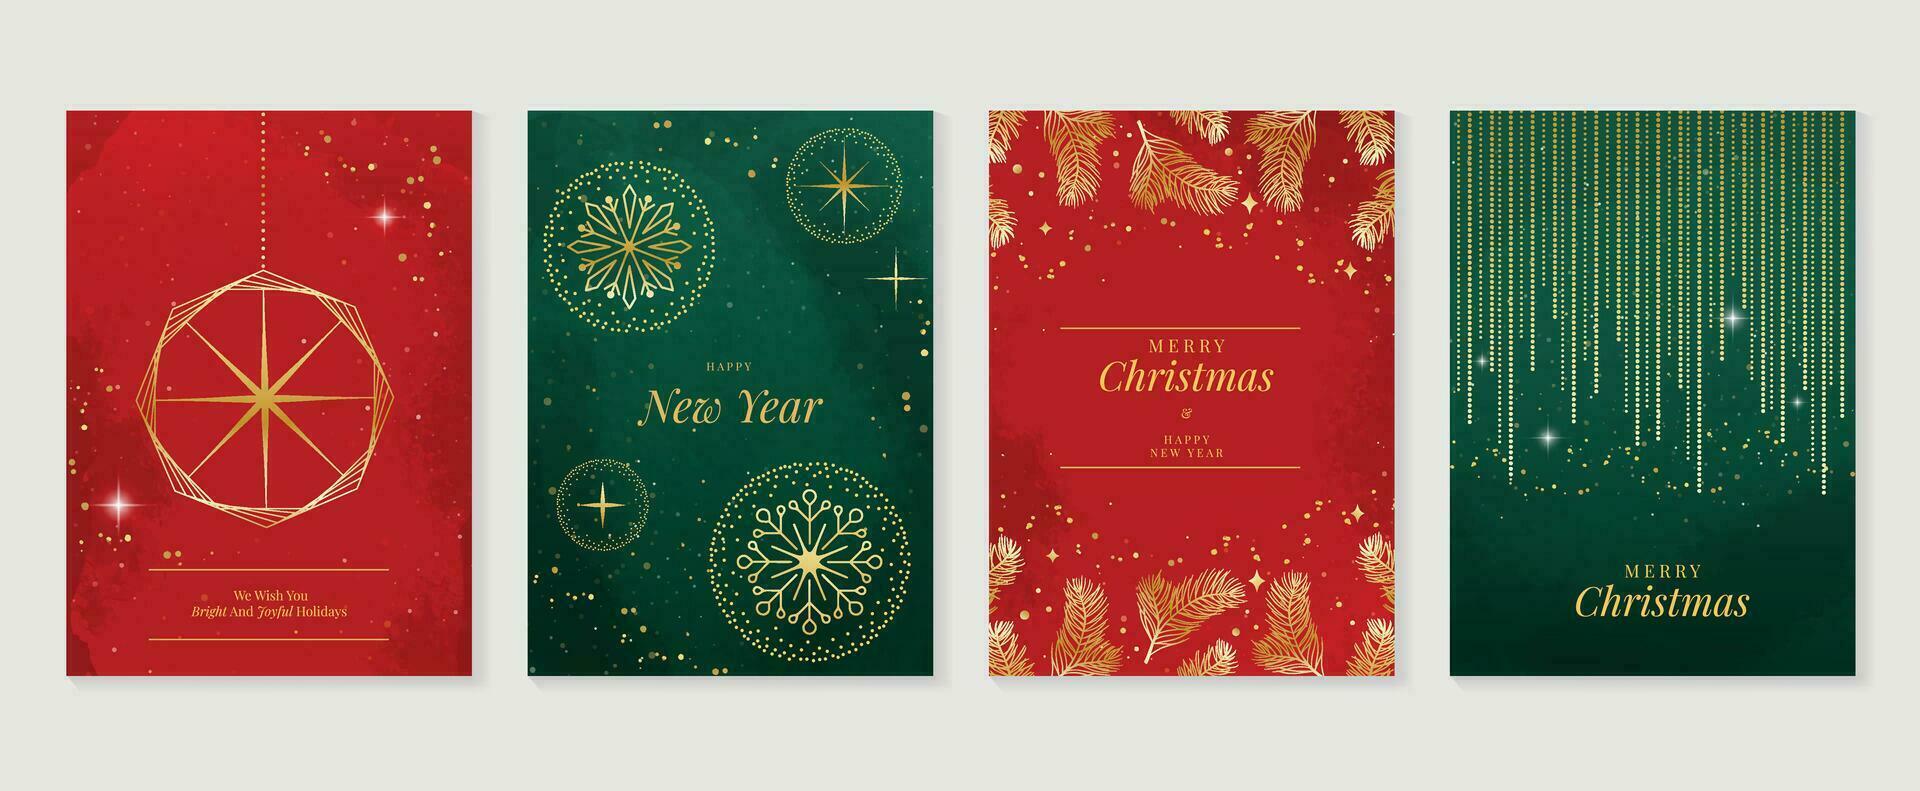 Luxury christmas invitation card art deco design vector. Christmas bauble ball, foliage, snow, watercolor texture on green and red background. Design illustration for cover, poster, wallpaper. vector